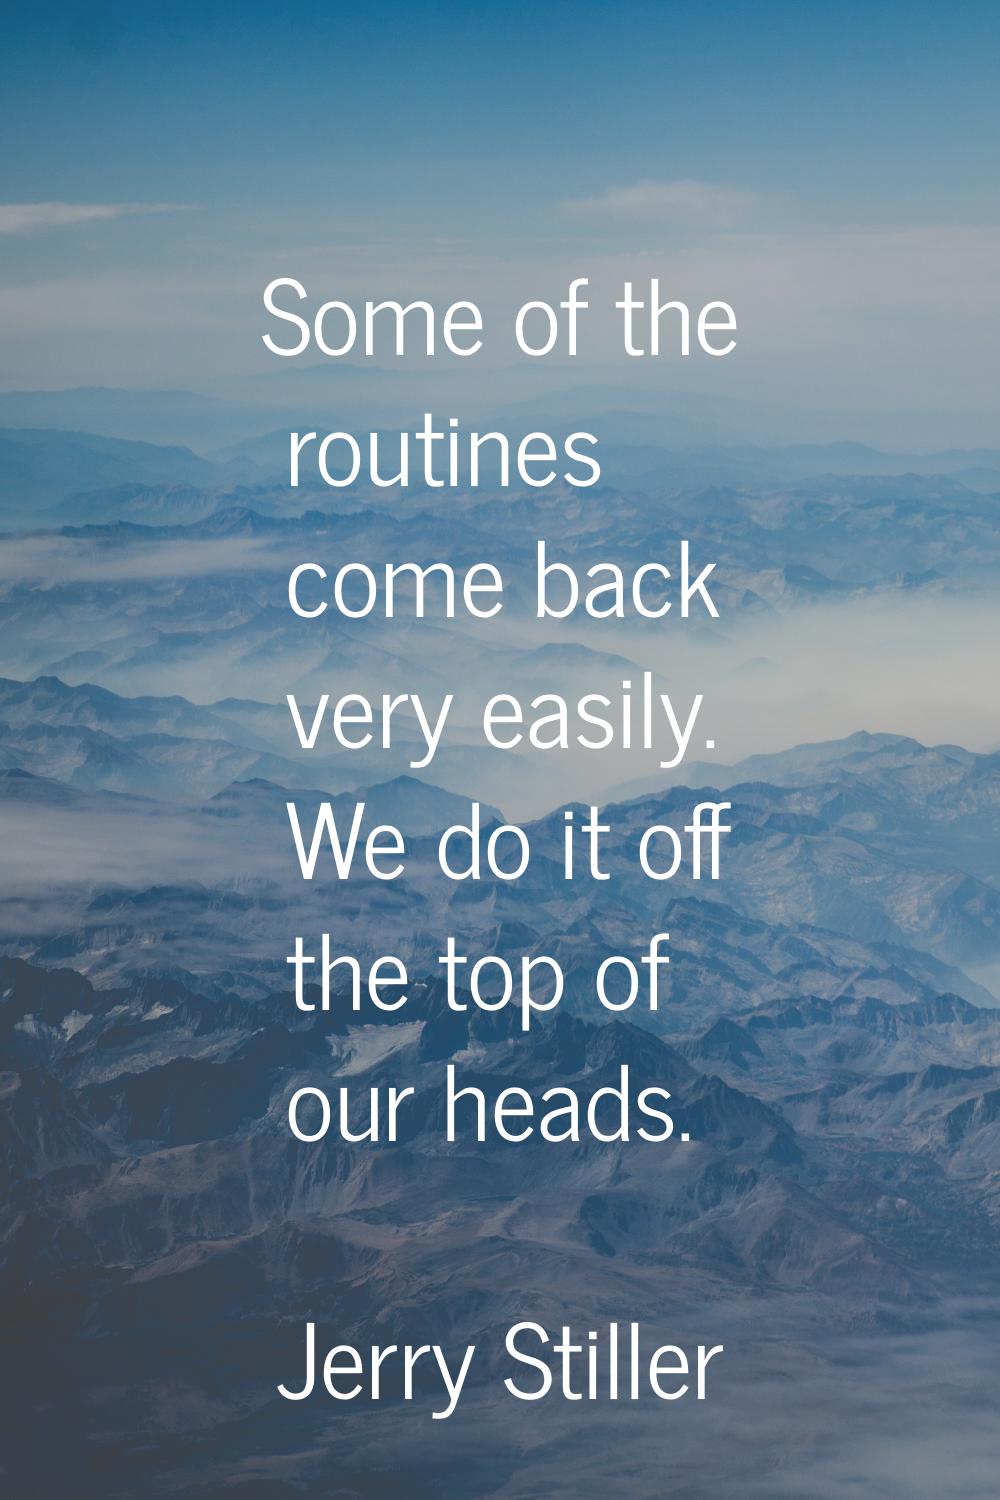 Some of the routines come back very easily. We do it off the top of our heads.